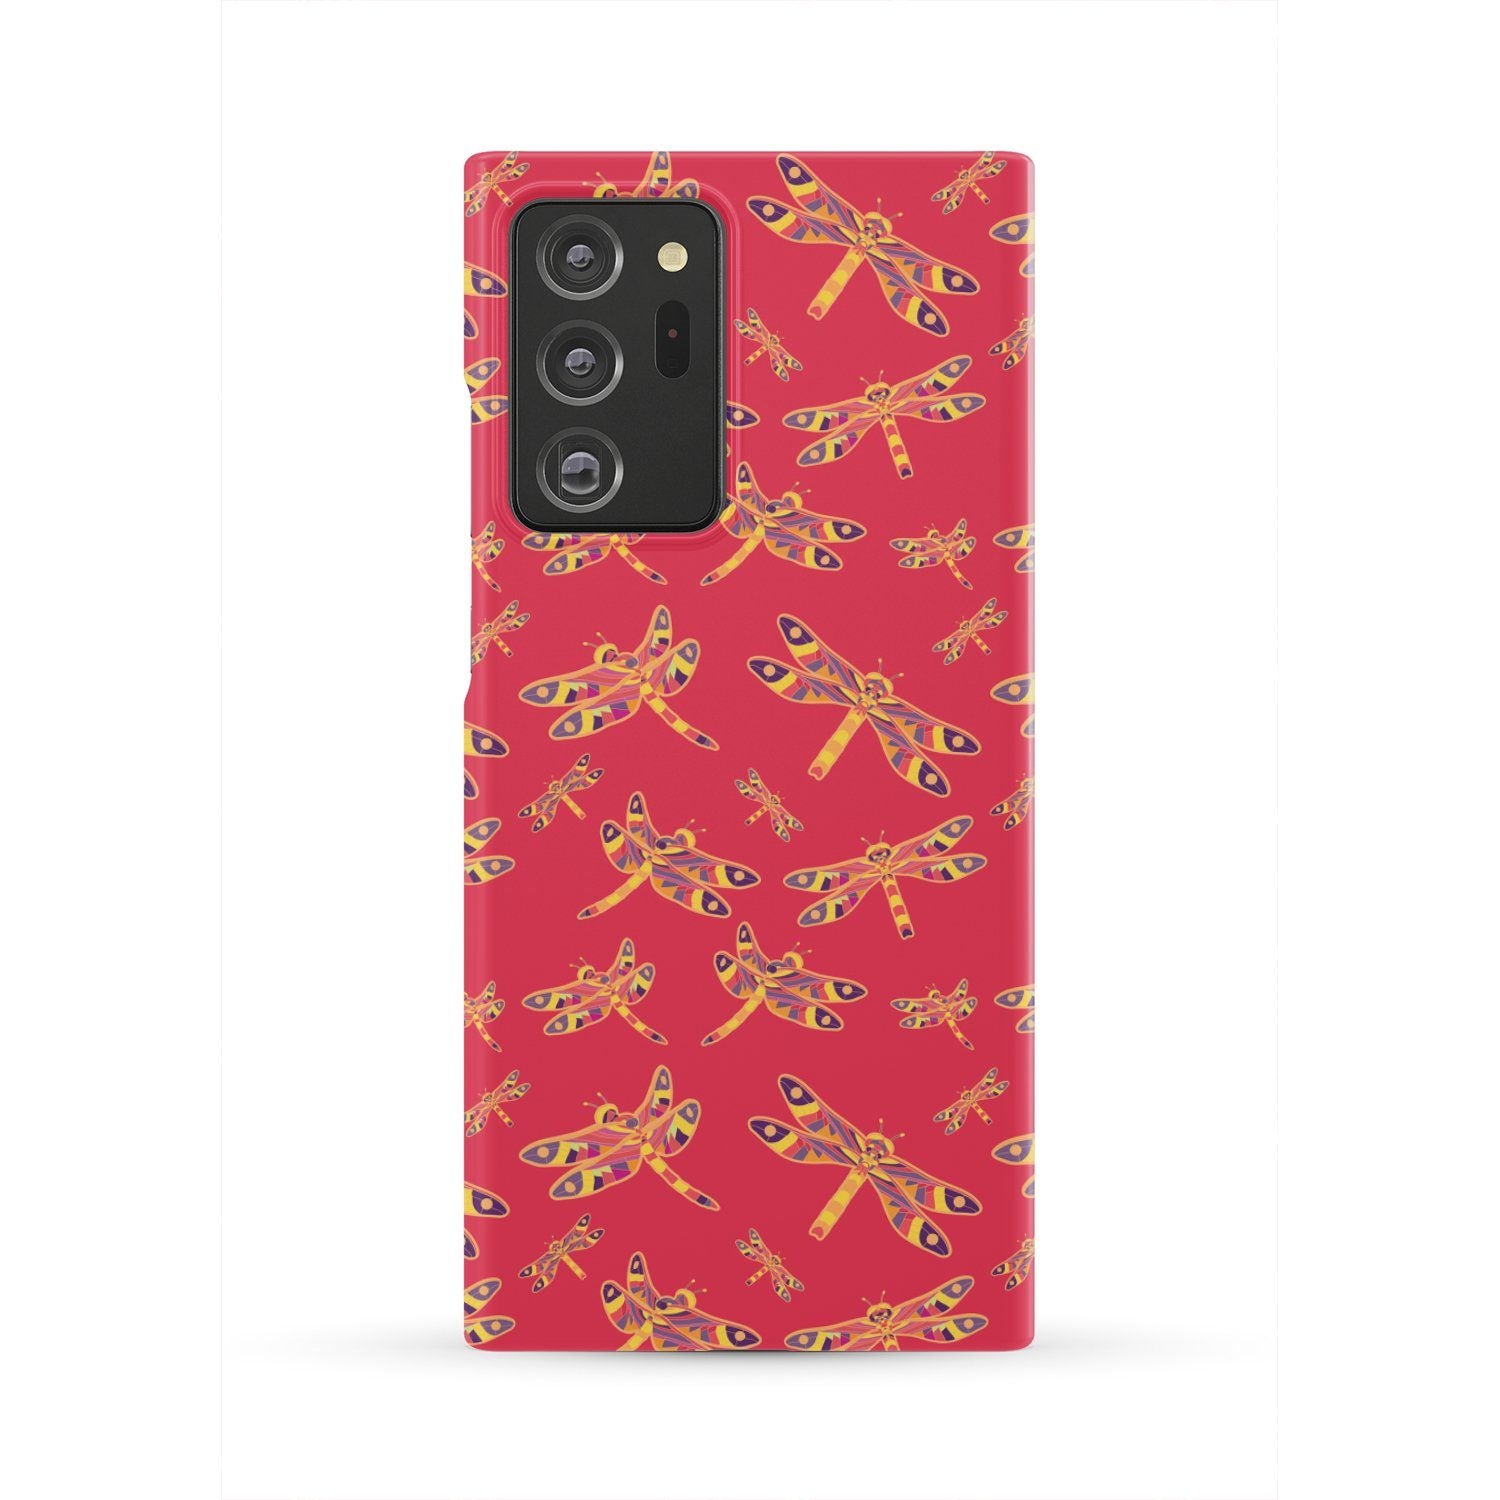 Gathering Rouge Phone Case Phone Case wc-fulfillment Samsung Galaxy Note 20 Ultra 